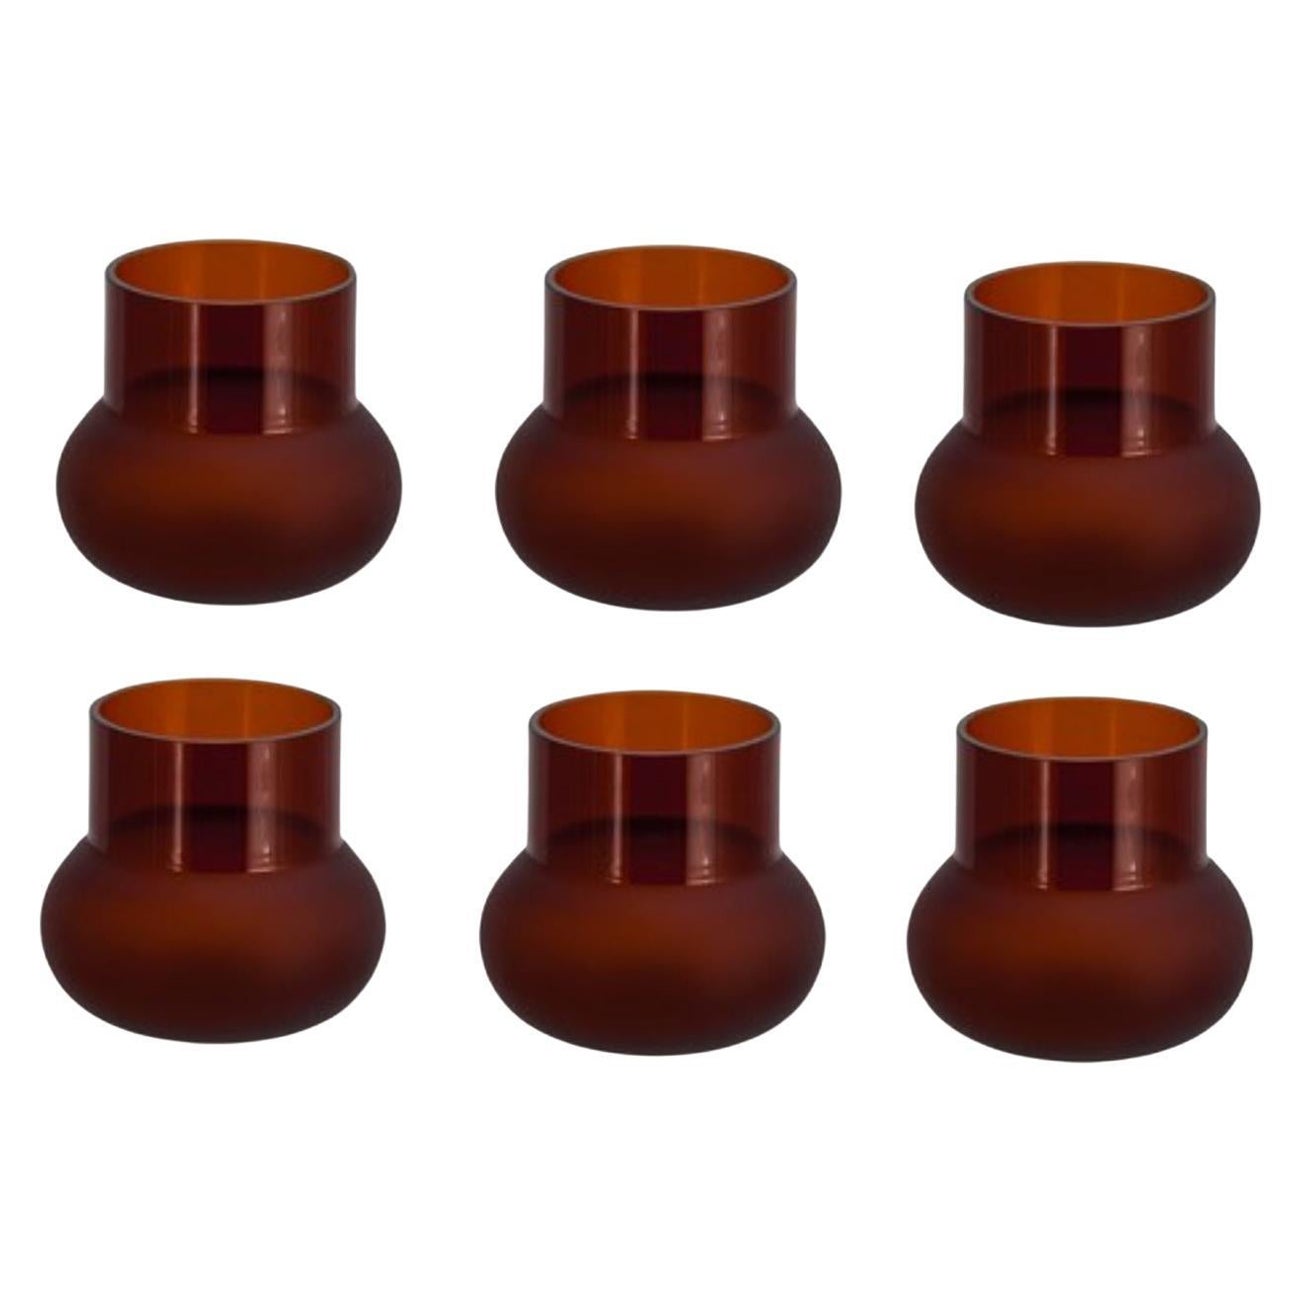 Set of 6 Dark Amber Glasses by Pulpo For Sale